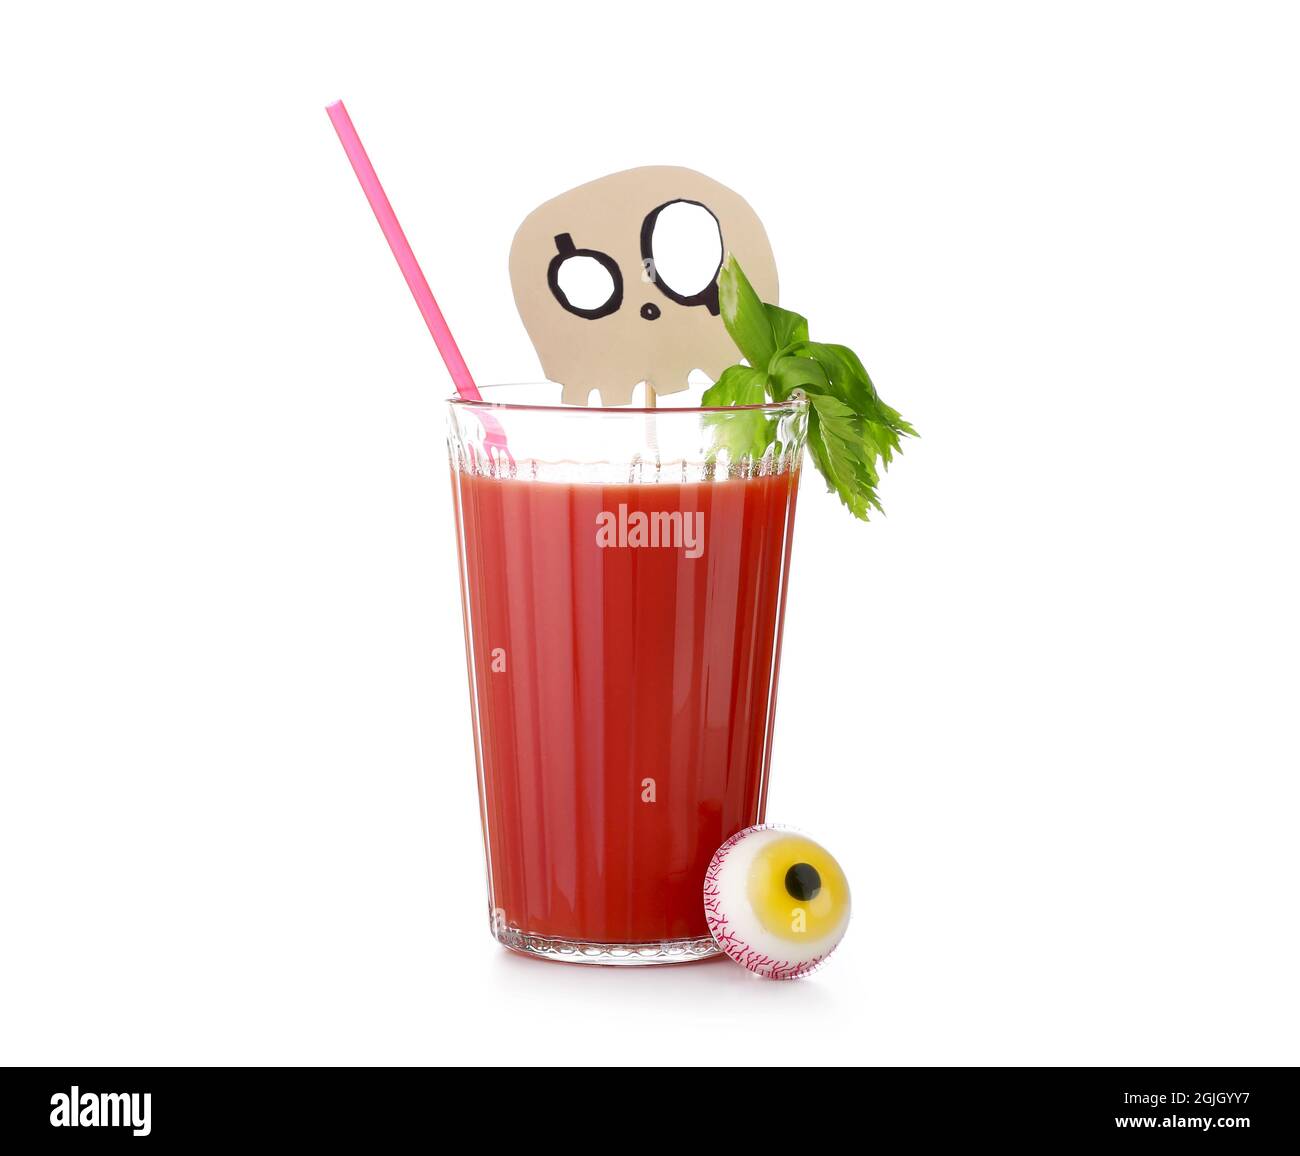 https://c8.alamy.com/comp/2GJGYY7/glass-of-tasty-bloody-mary-cocktail-decorated-for-halloween-on-white-background-2GJGYY7.jpg